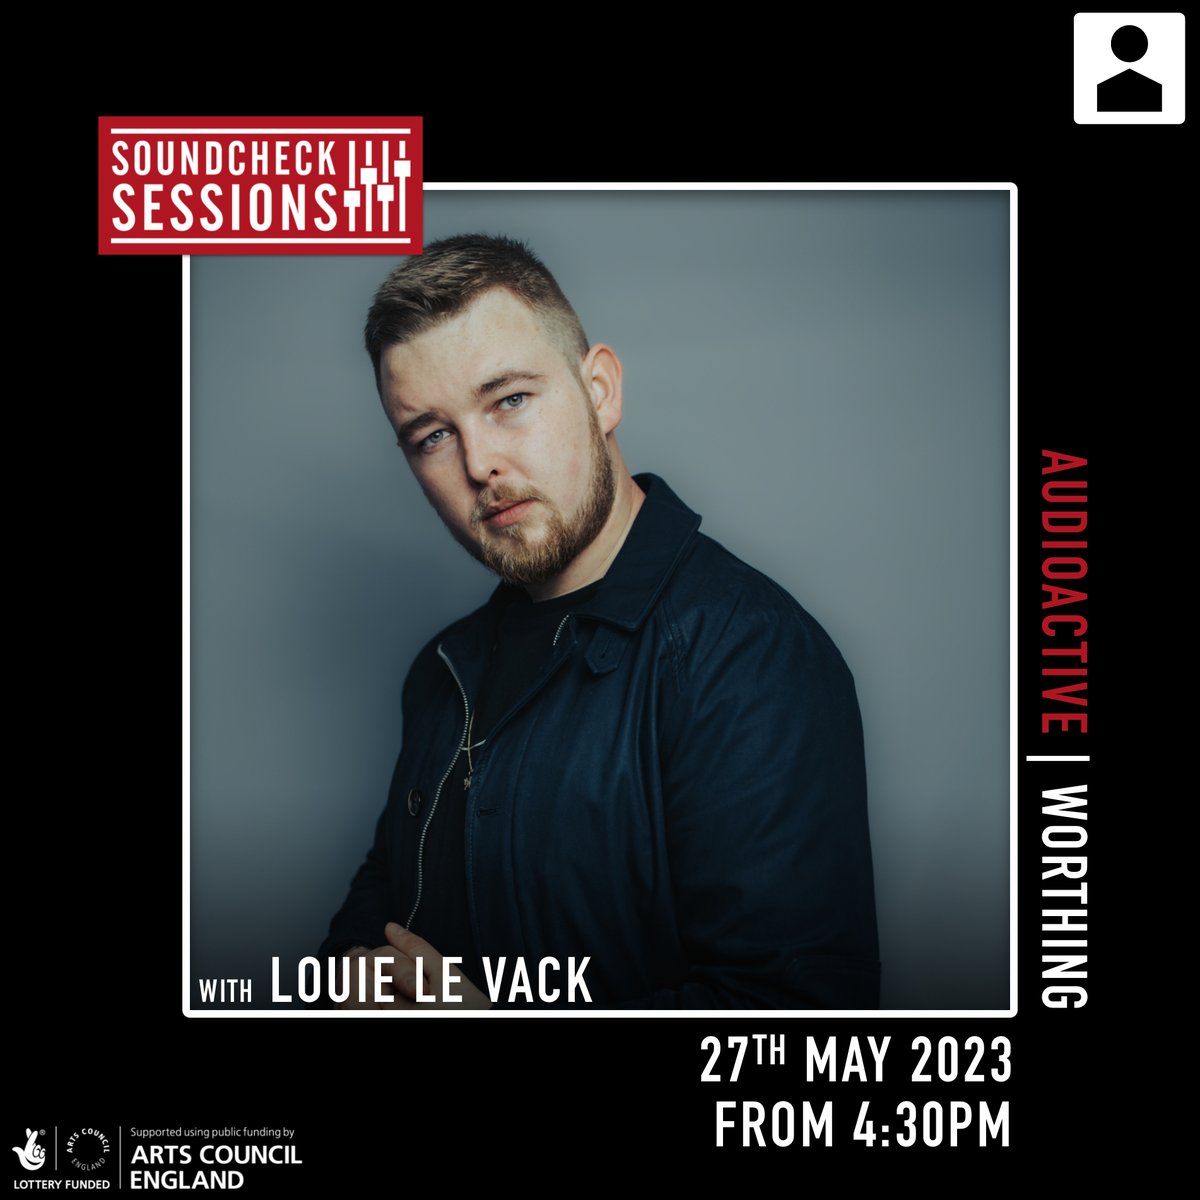 Ever wondered how a soundcheck works before a gig and how to get a job running one? Sign up free to find out how @Audio_Active in Worthing does it when MC/Poet Louie Le Vack comes to town ❤️ Full info and sign-up on our website ✨